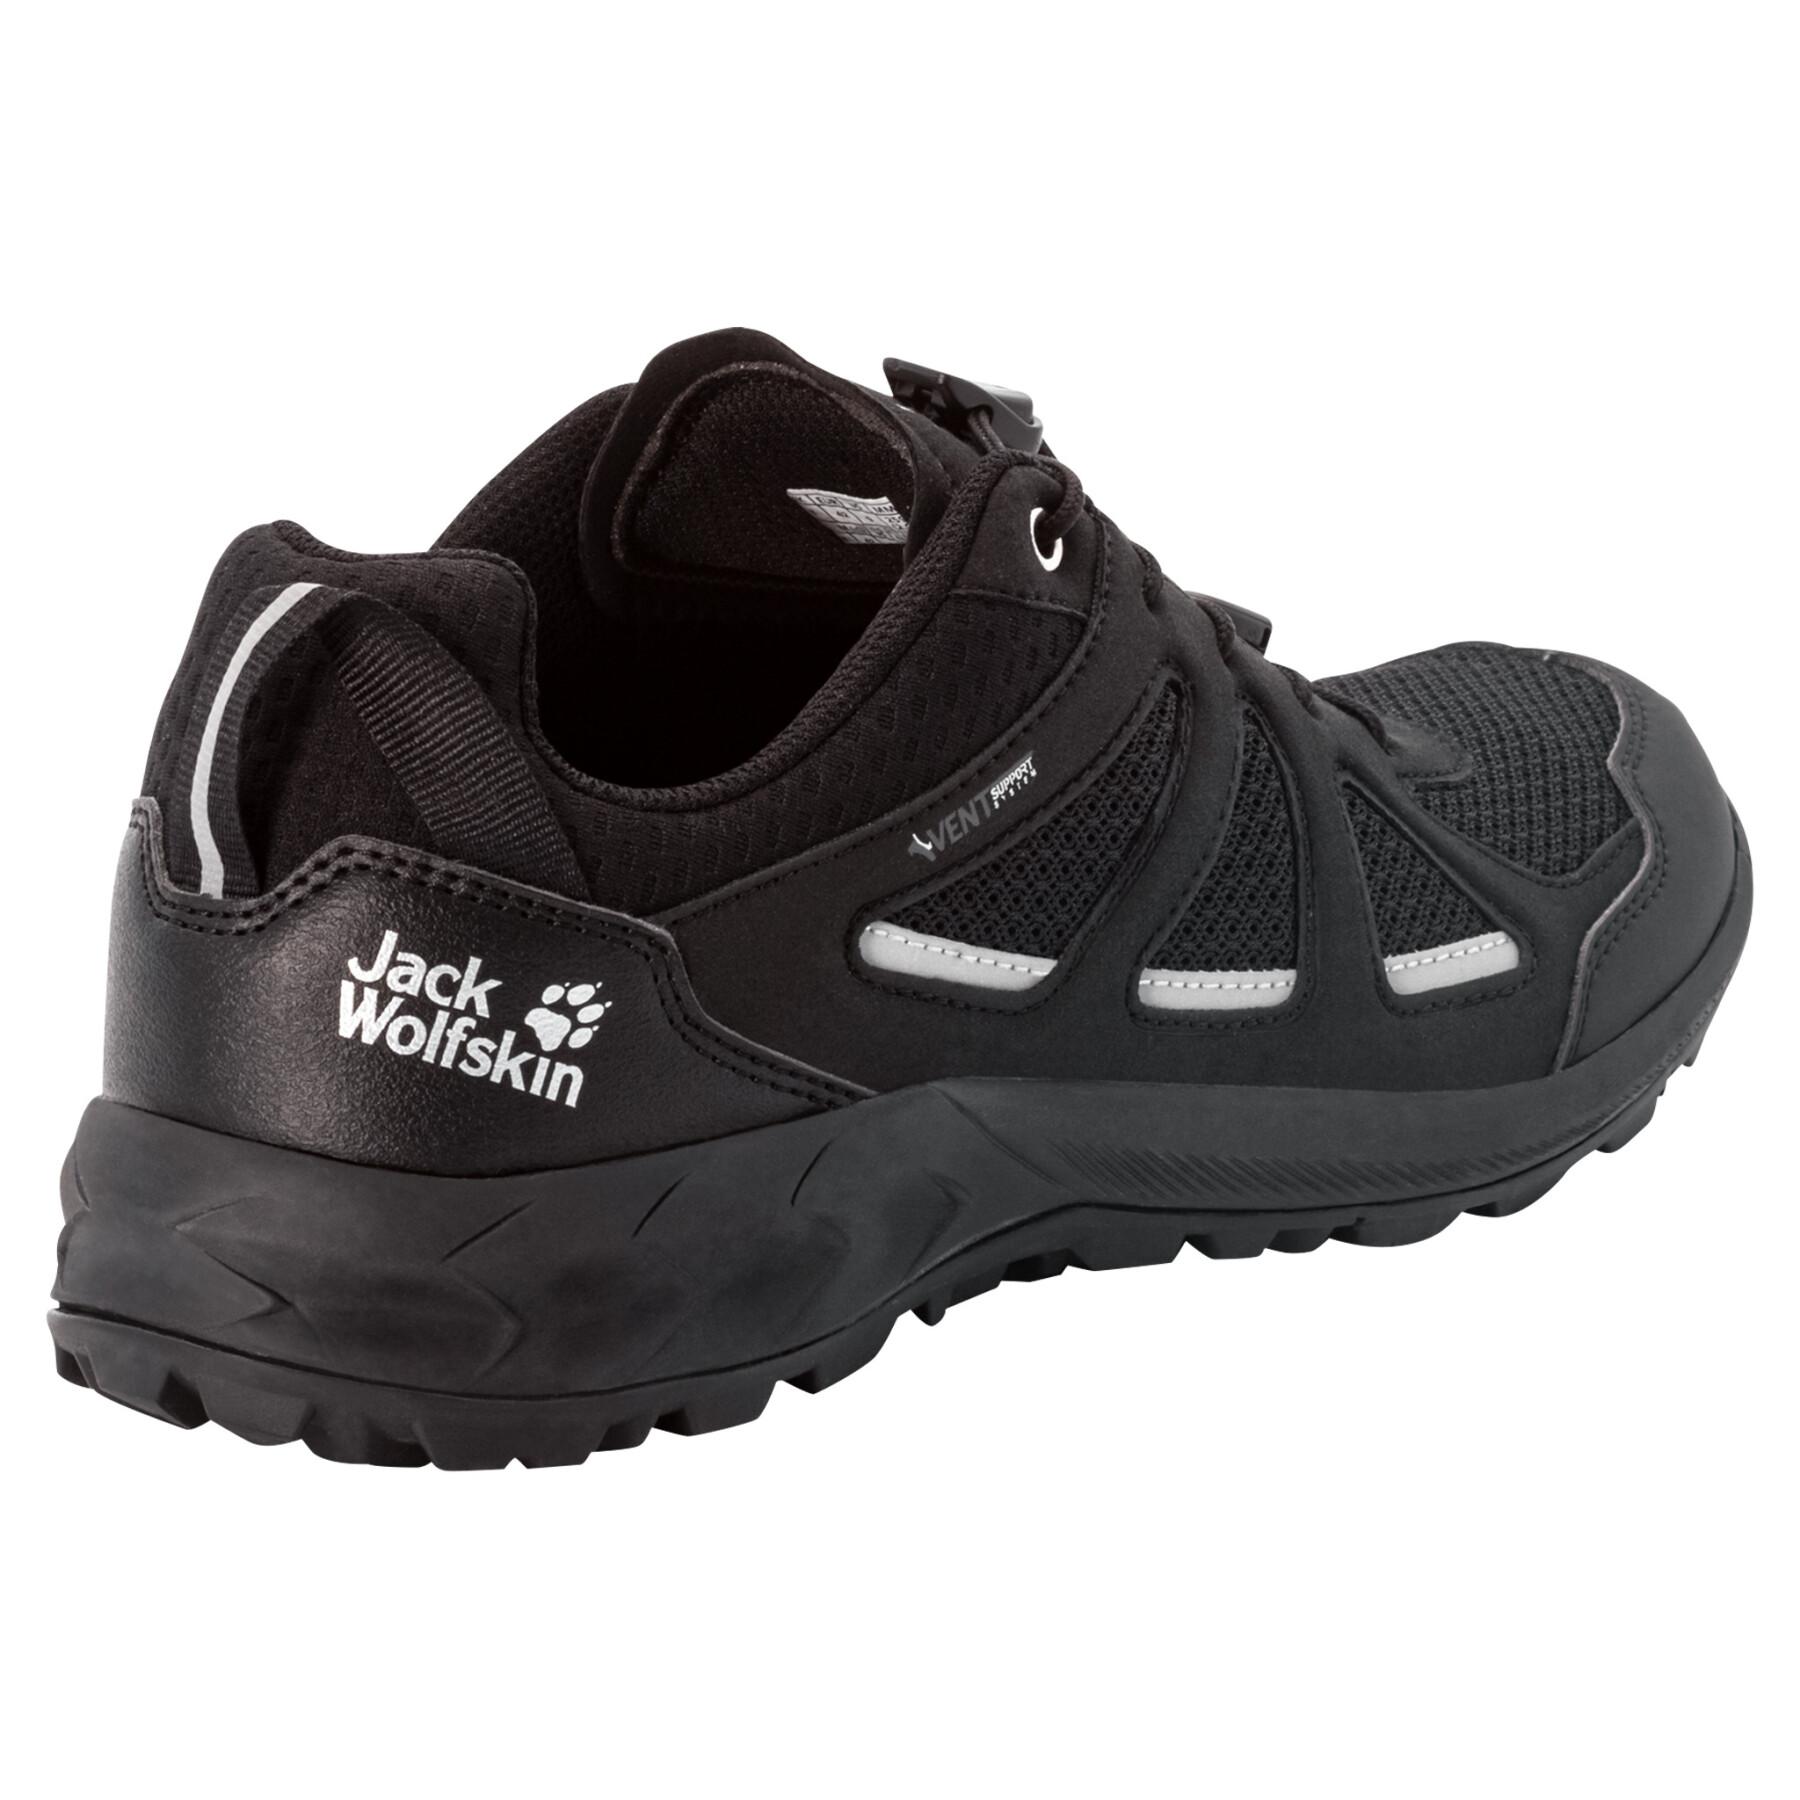 Hiking shoes Jack Wolfskin Woodland 2 Vent Low